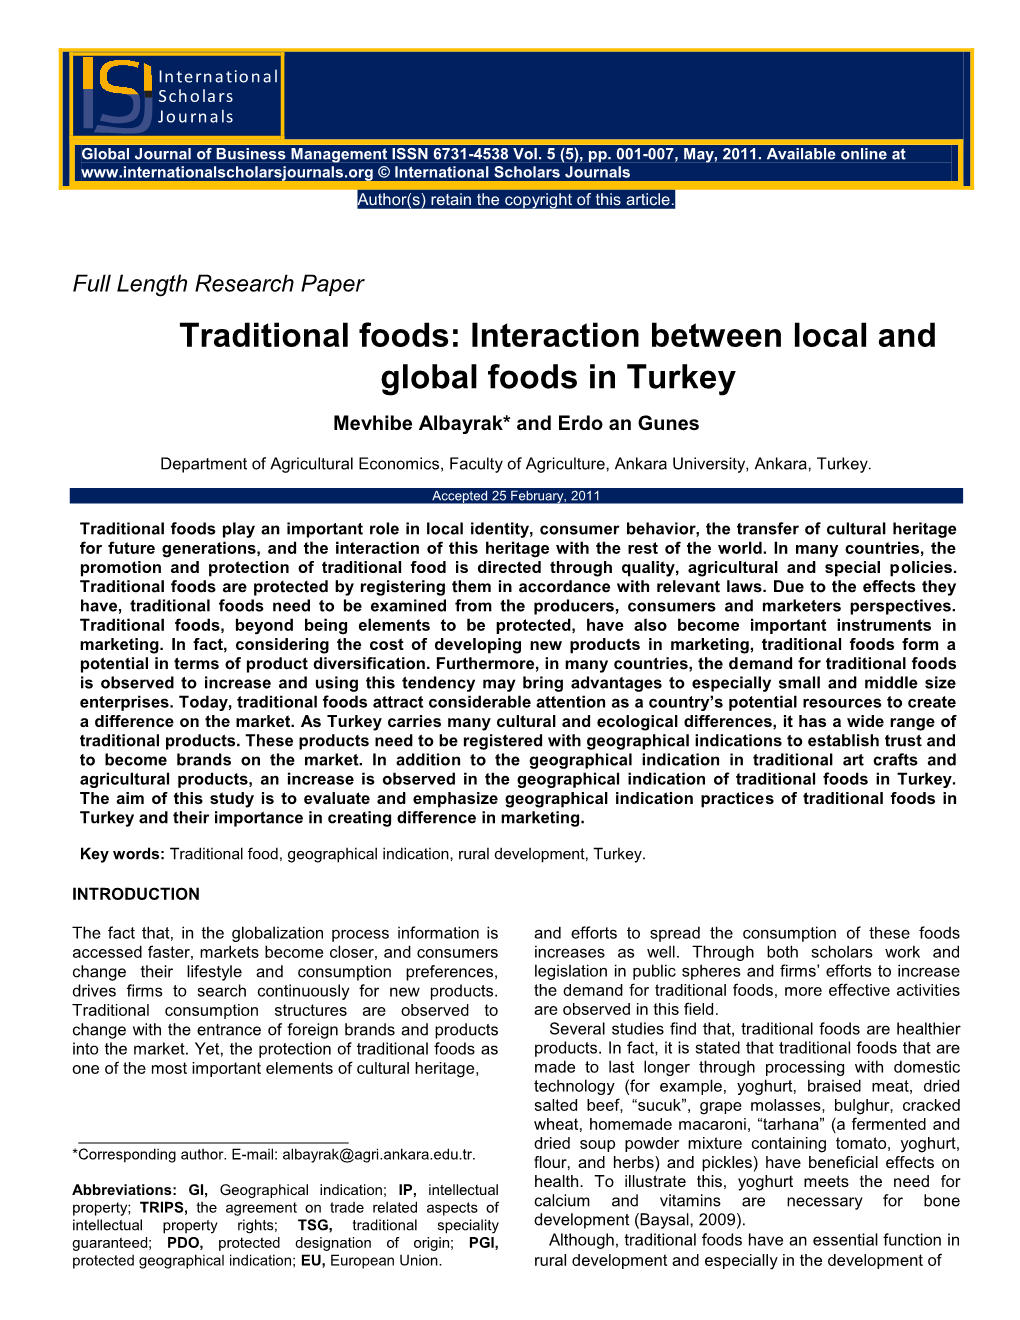 Traditional Foods: Interaction Between Local and Global Foods in Turkey